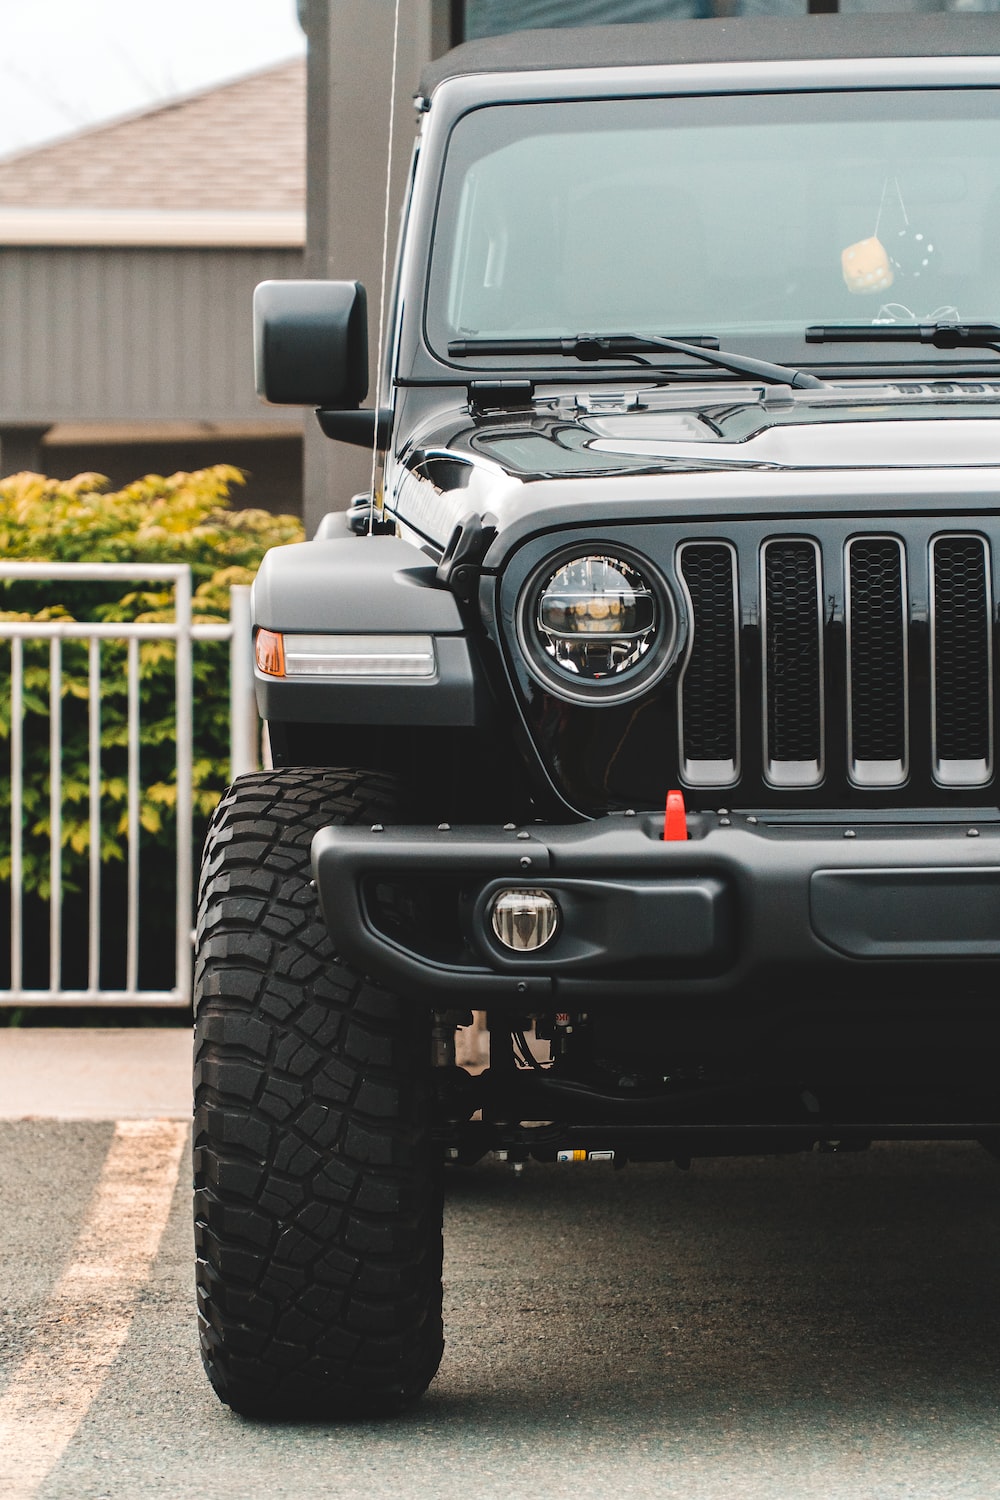 Jeep Wrangler Picture. Download Free Image